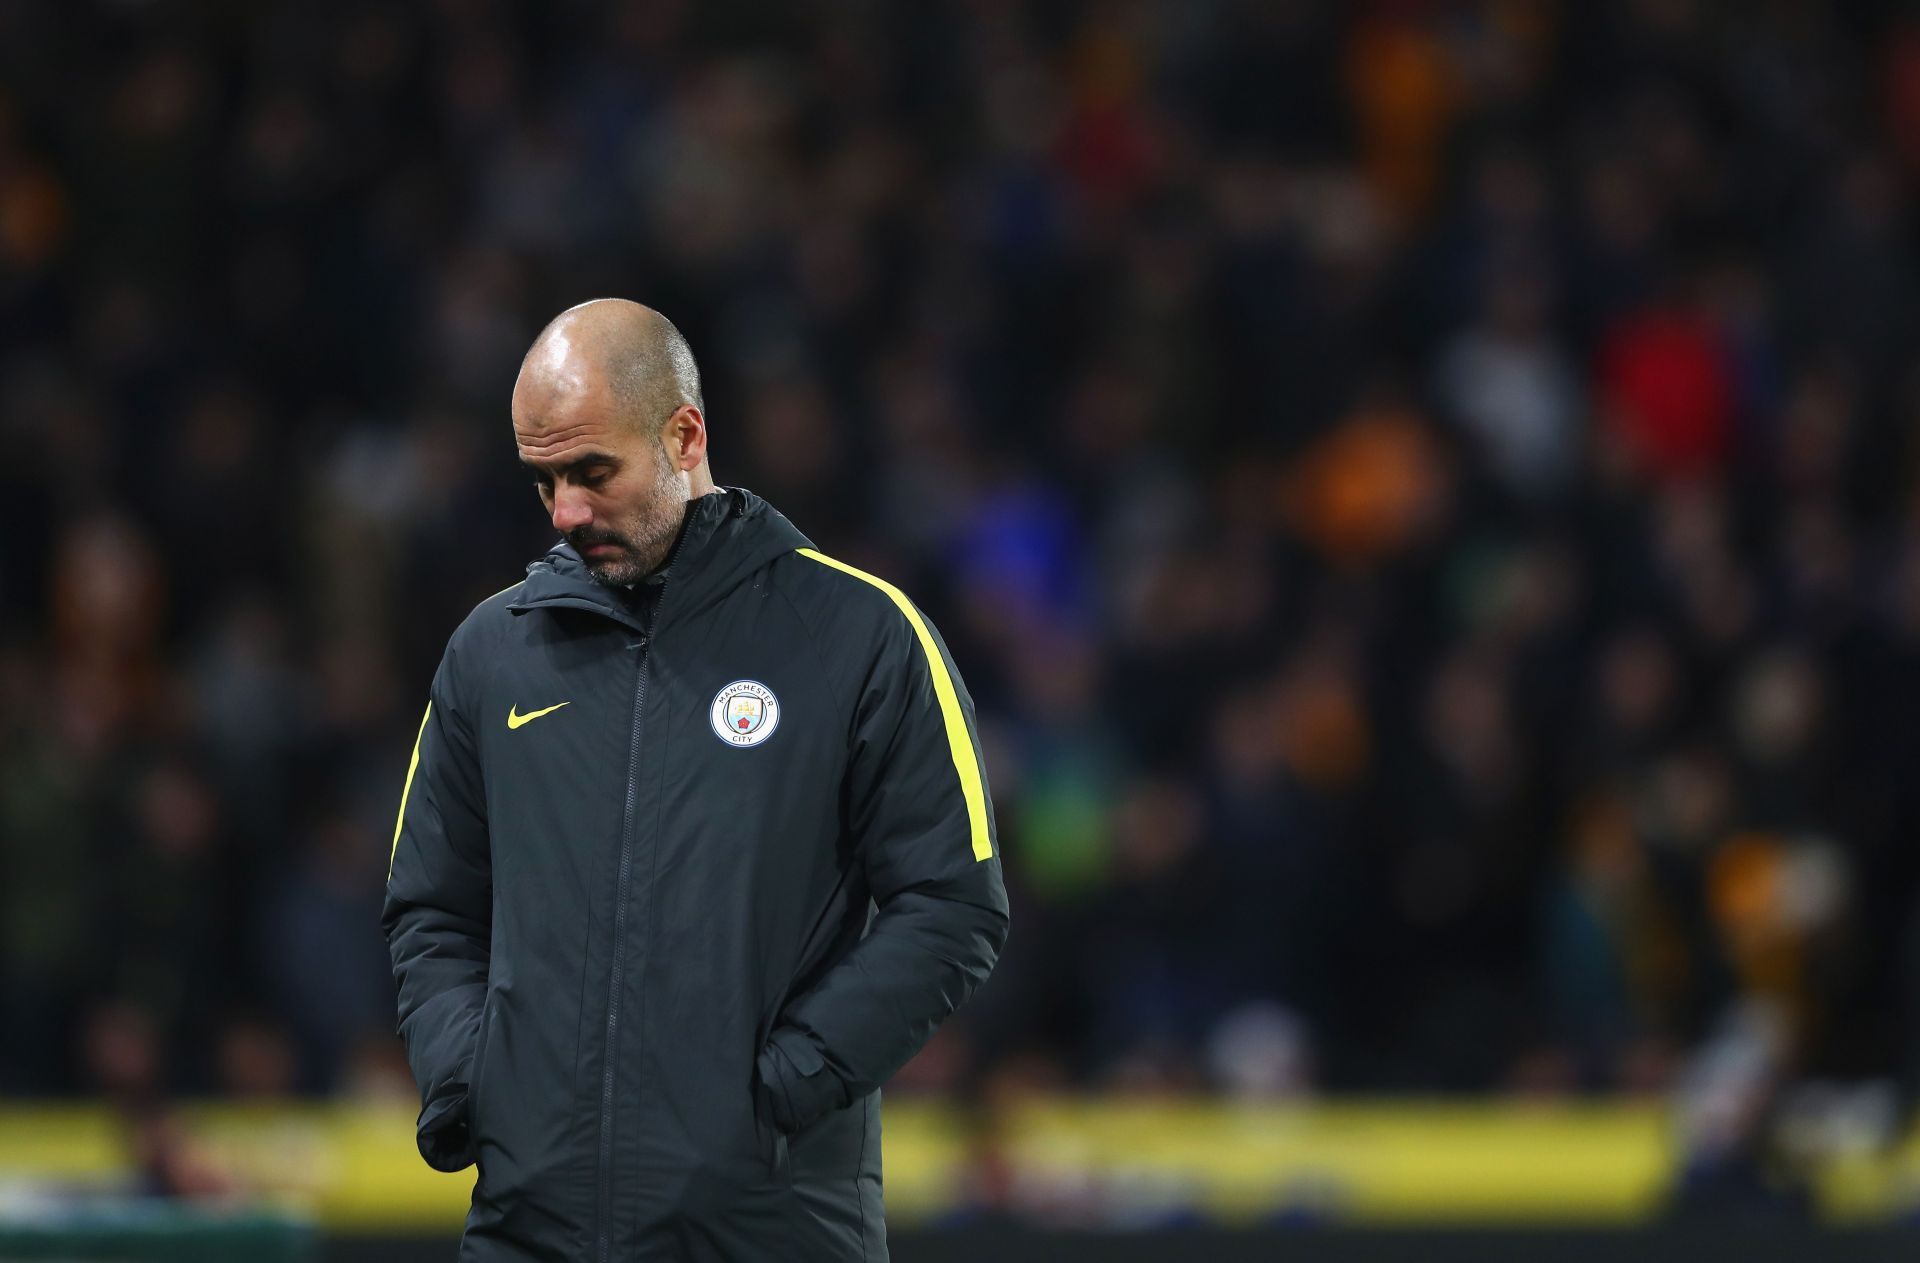 Pep Guardiola is guilty of some poor signings in his managerial career